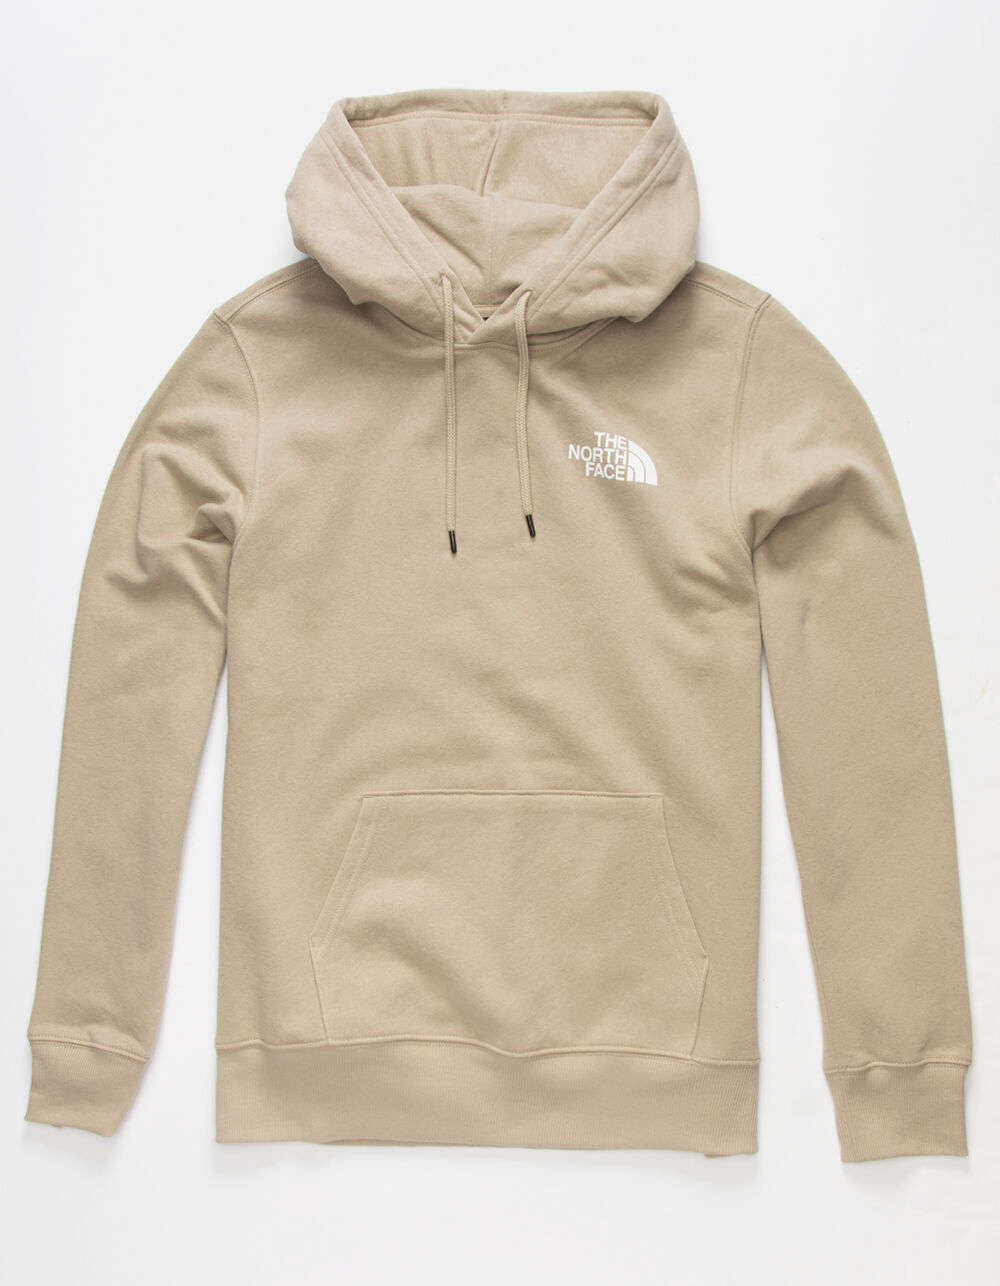 THE NORTH FACE Red Box NSE Mens Hoodie - BROWN/EGGPLANT | Tillys